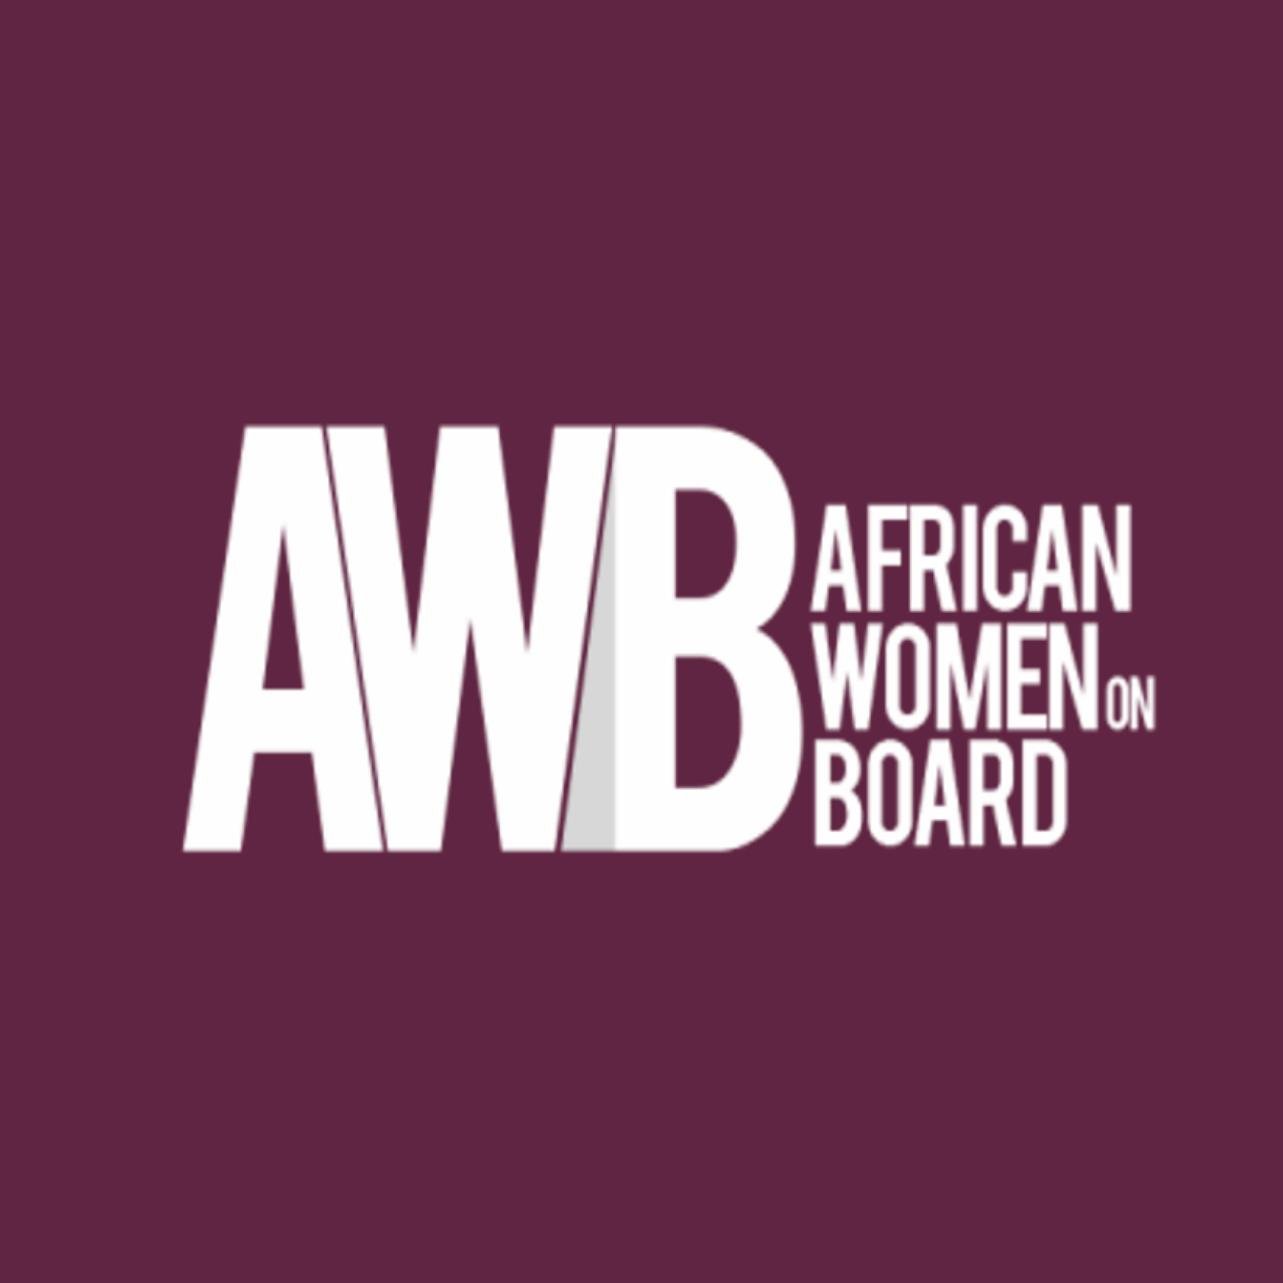 A non profit organization dedicated to advancing narratives and improving realities for African women & girls globally.